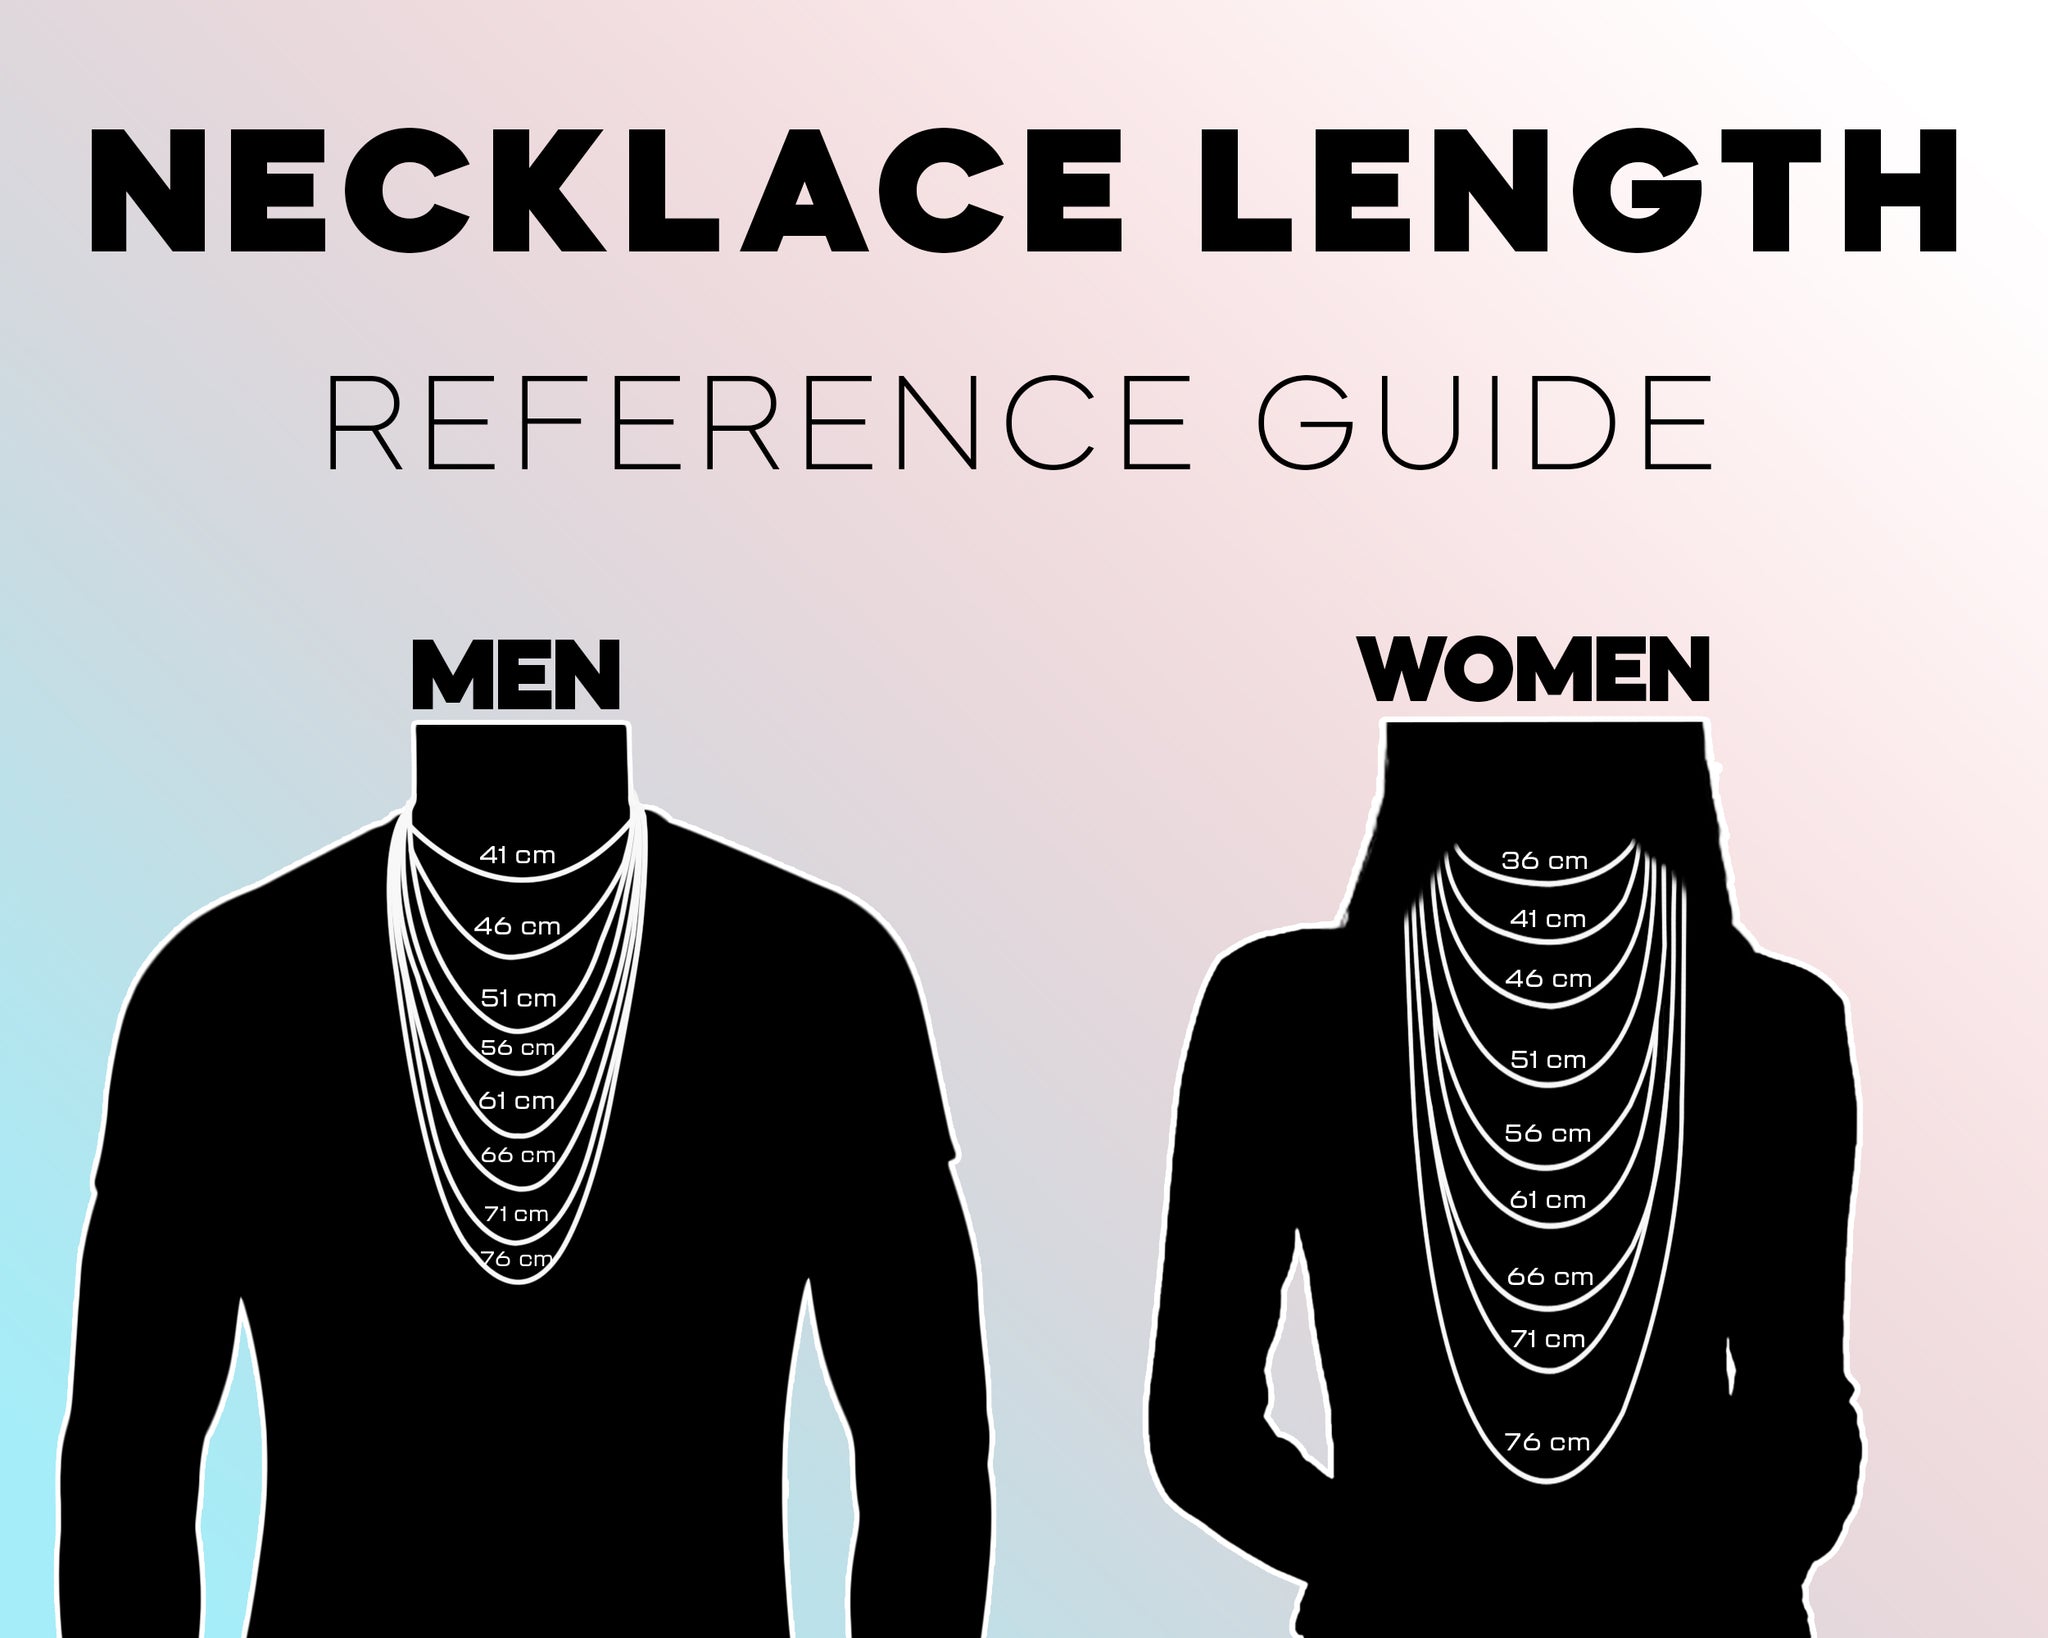 Necklace Length reference guide